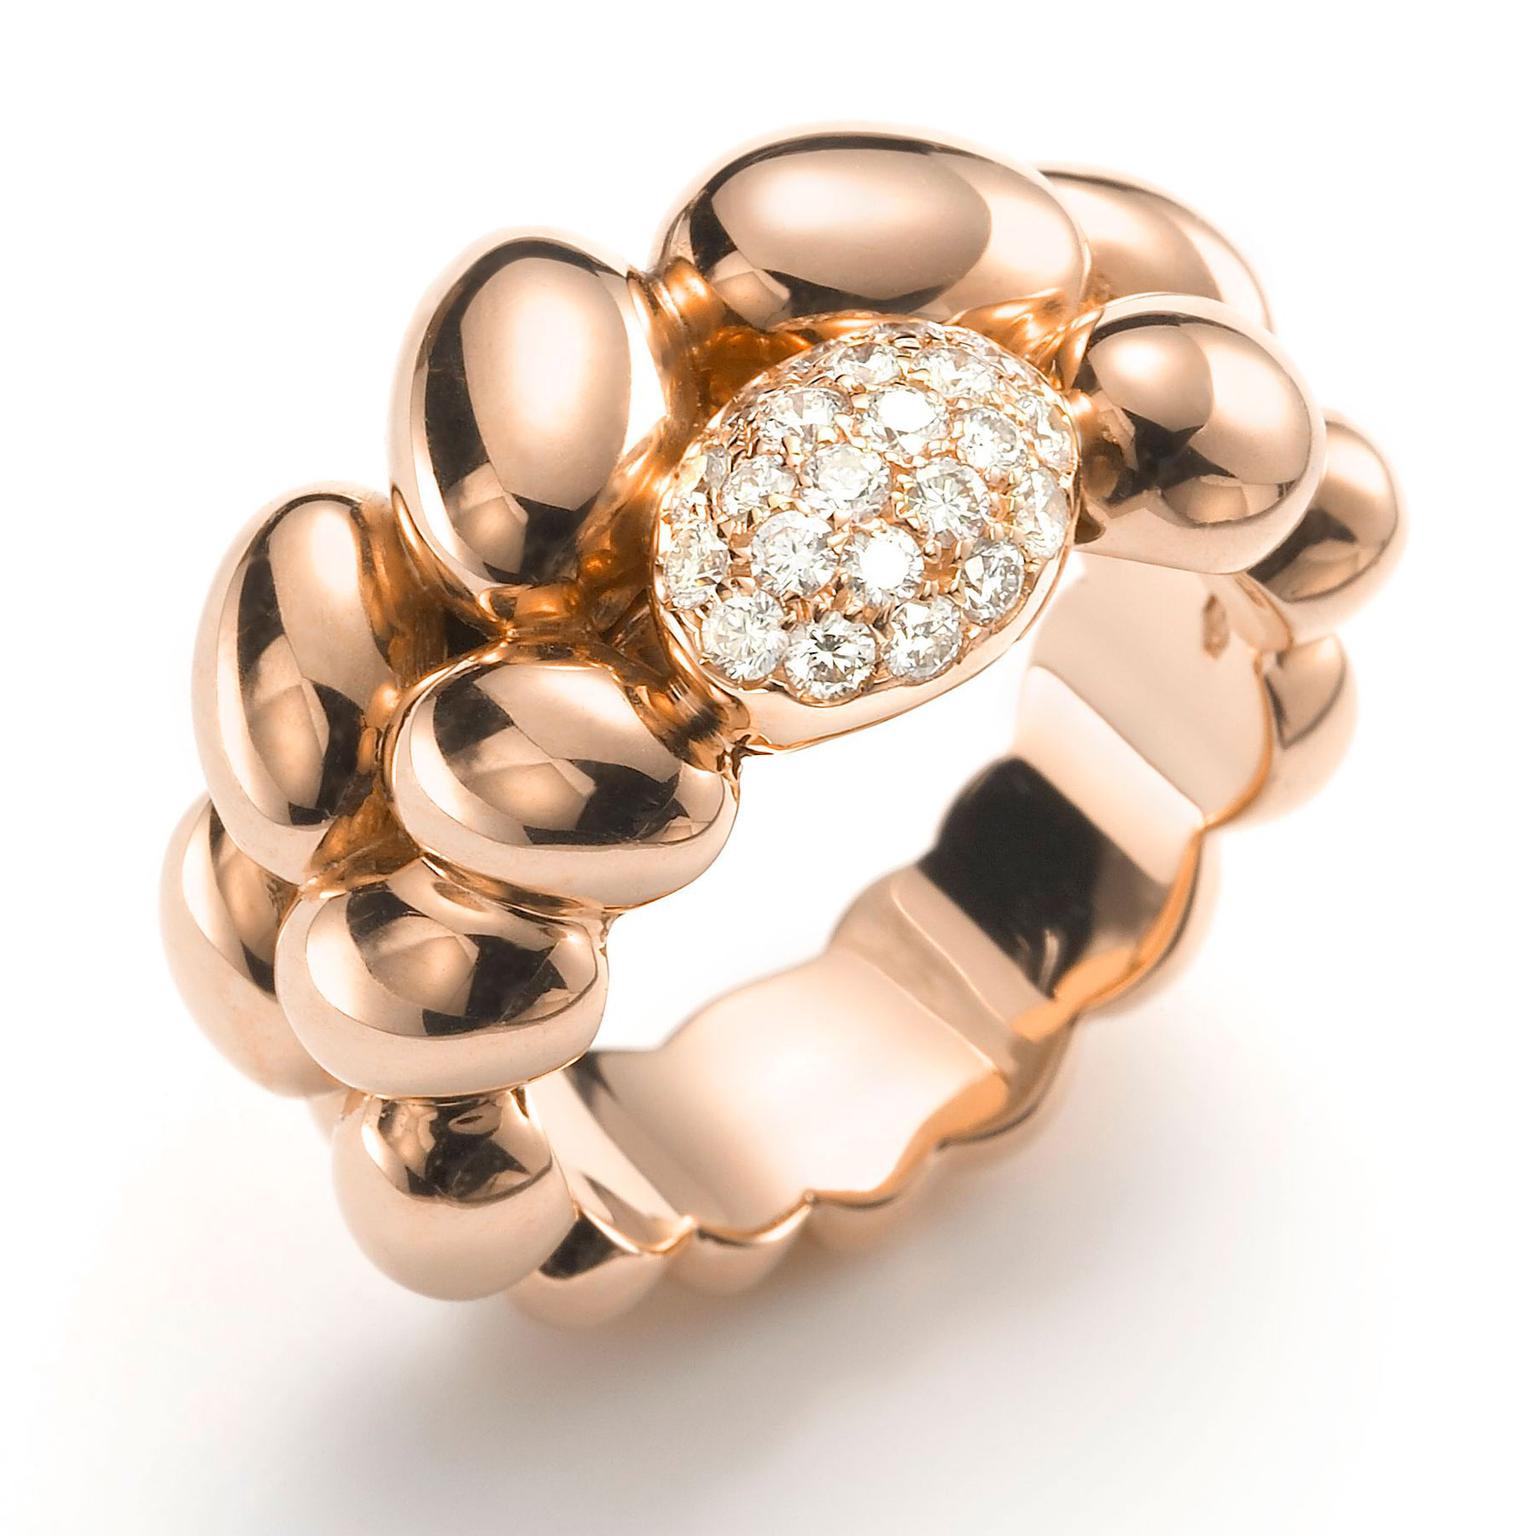 Mattioli The One ring with cabochons of rose gold spheres